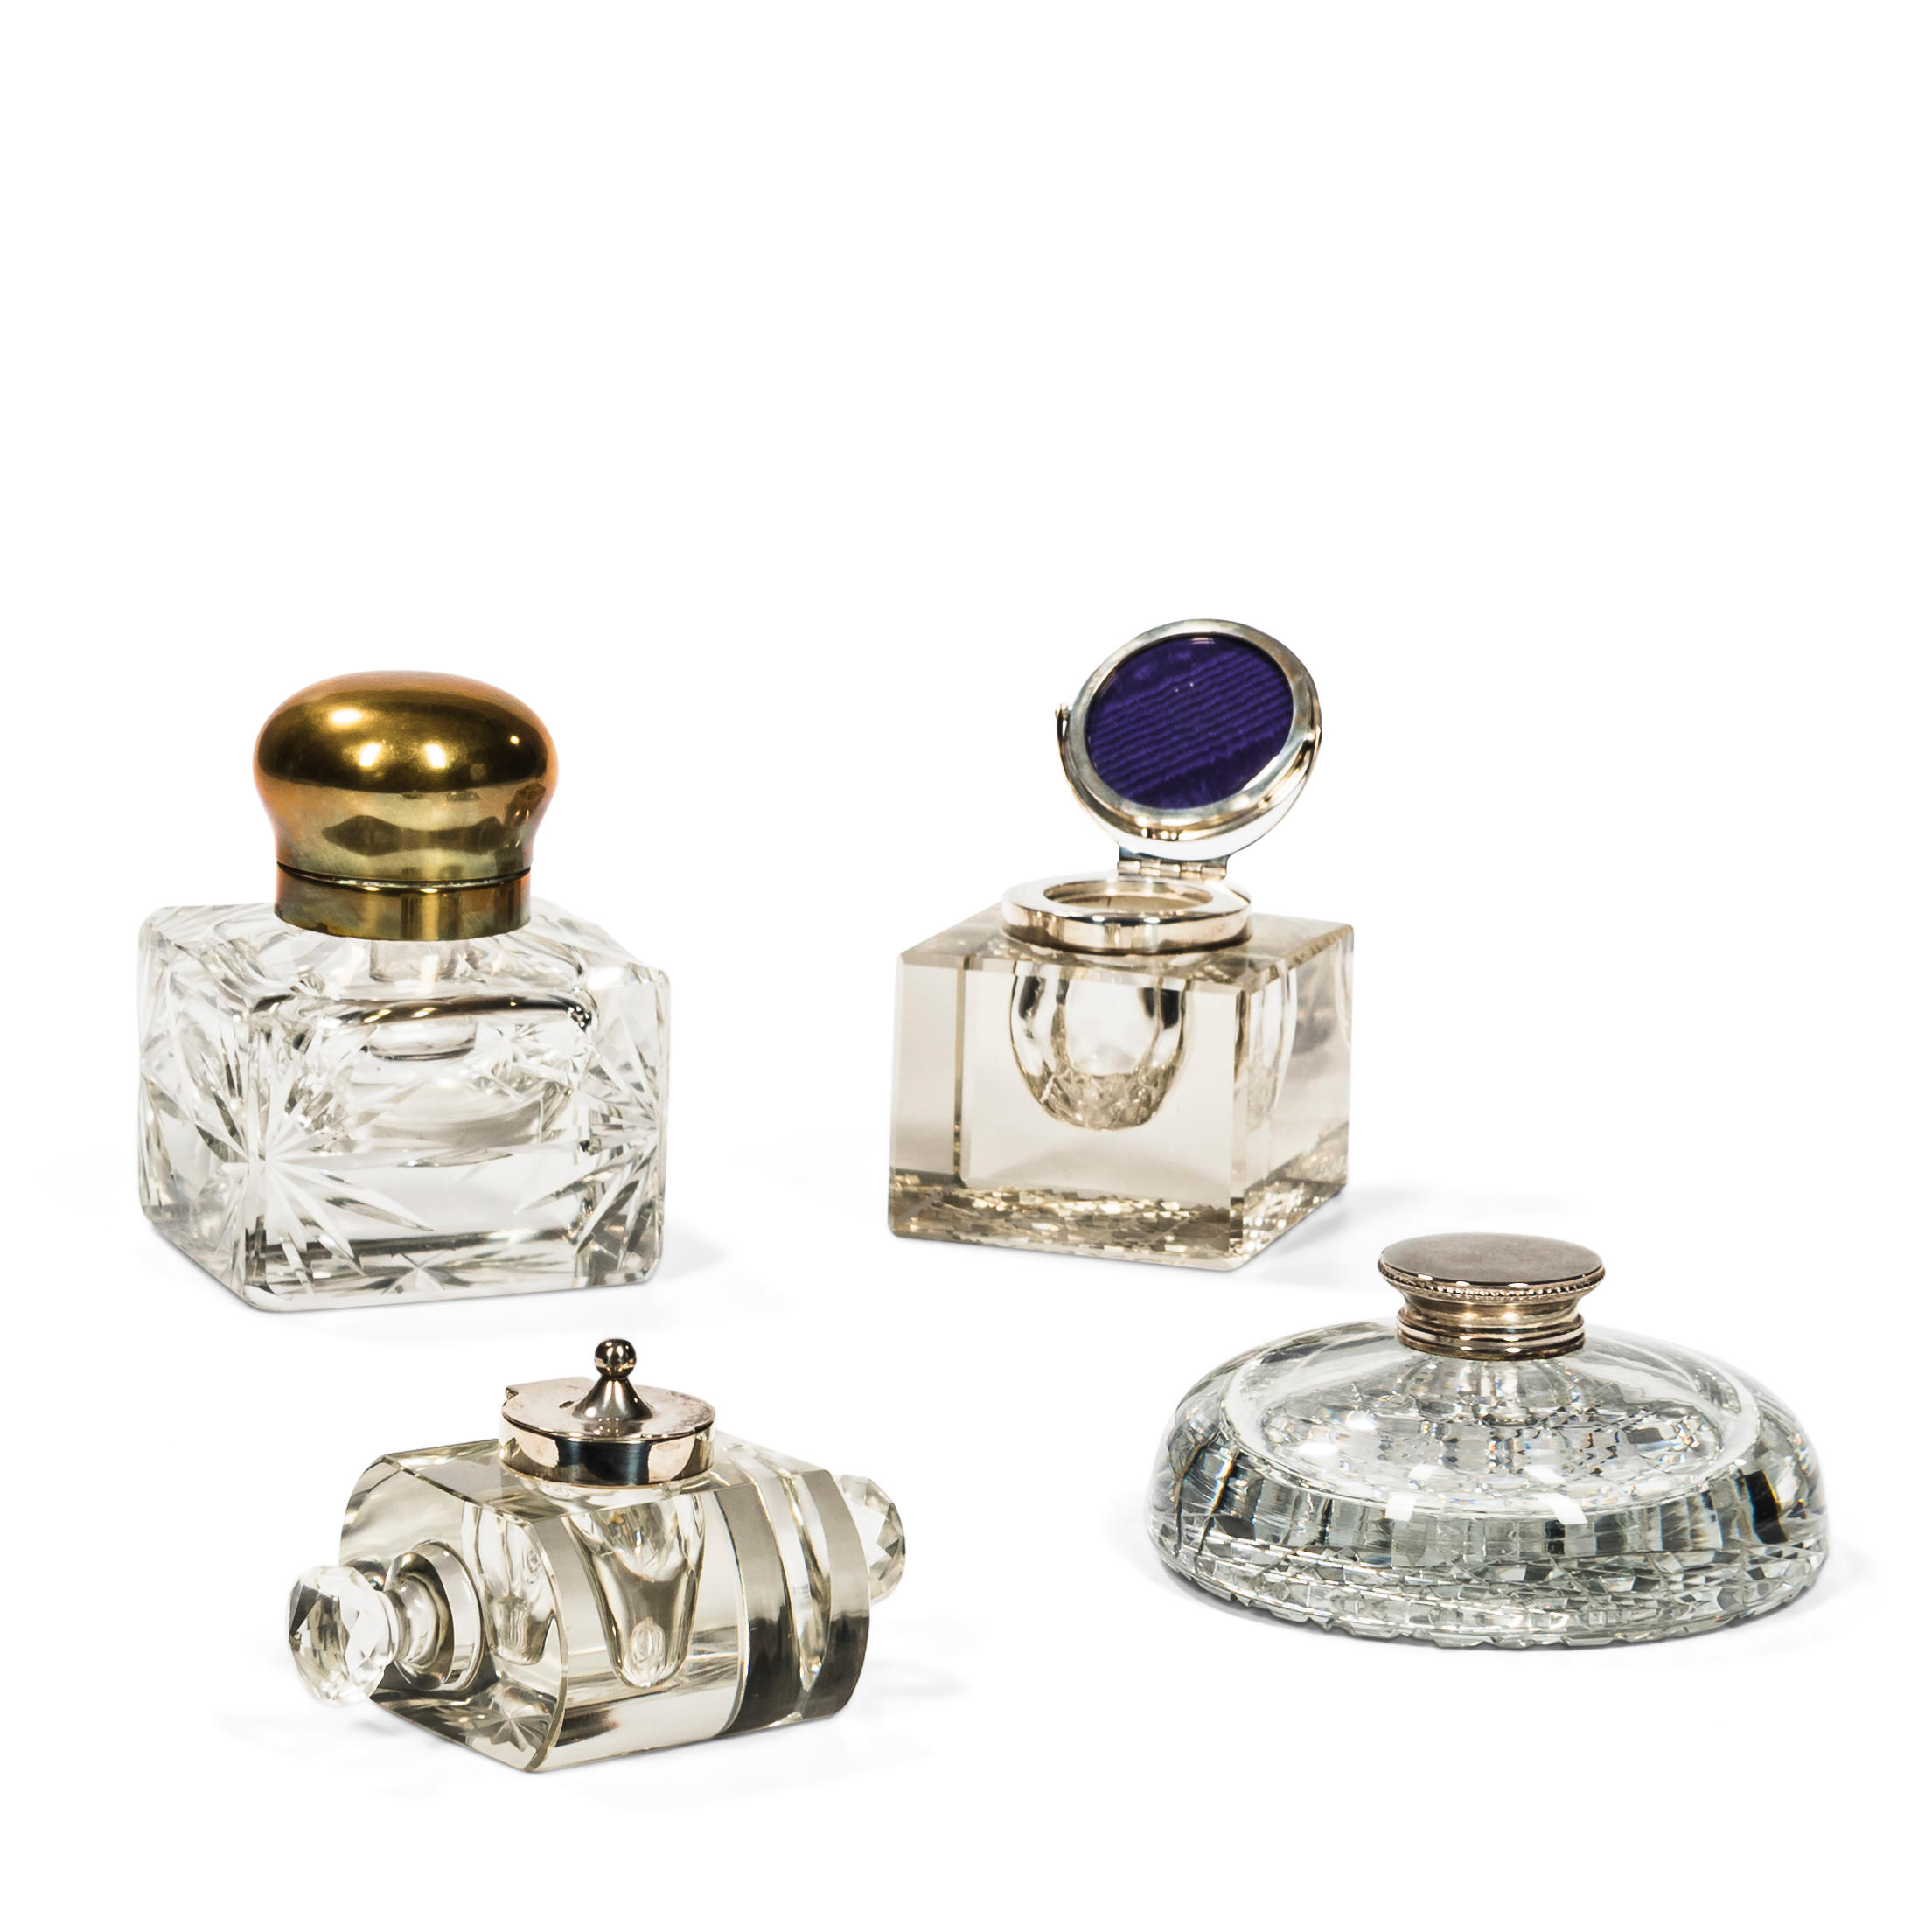 FOUR COLORLESS GLASS INKWELLS One